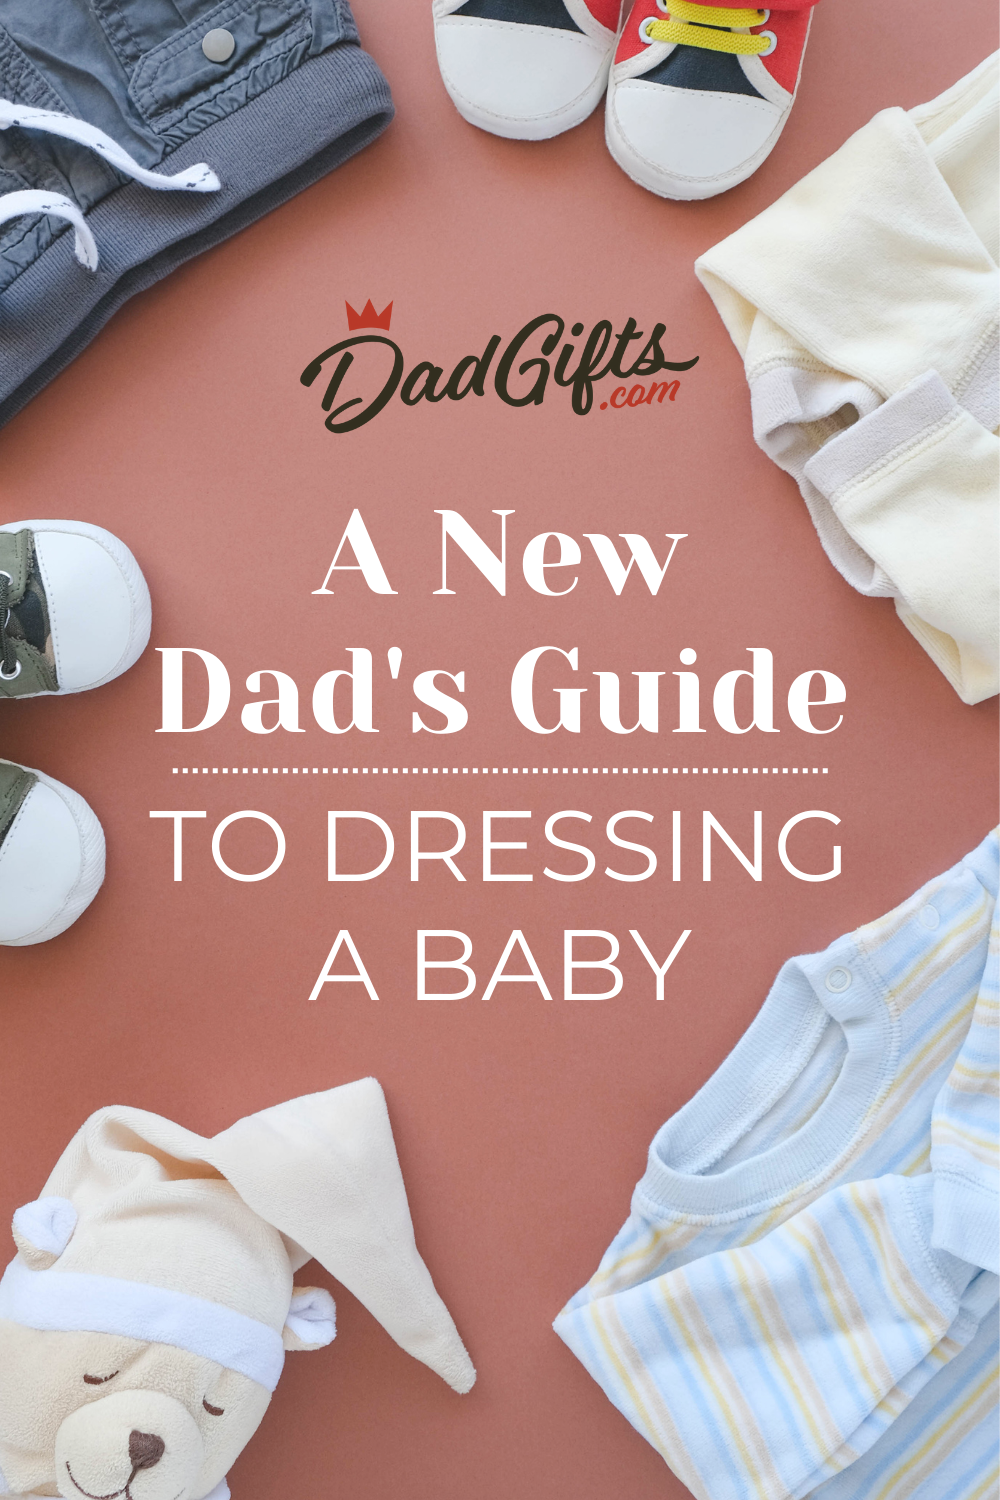 A New Dad’s Guide to Dressing a Baby